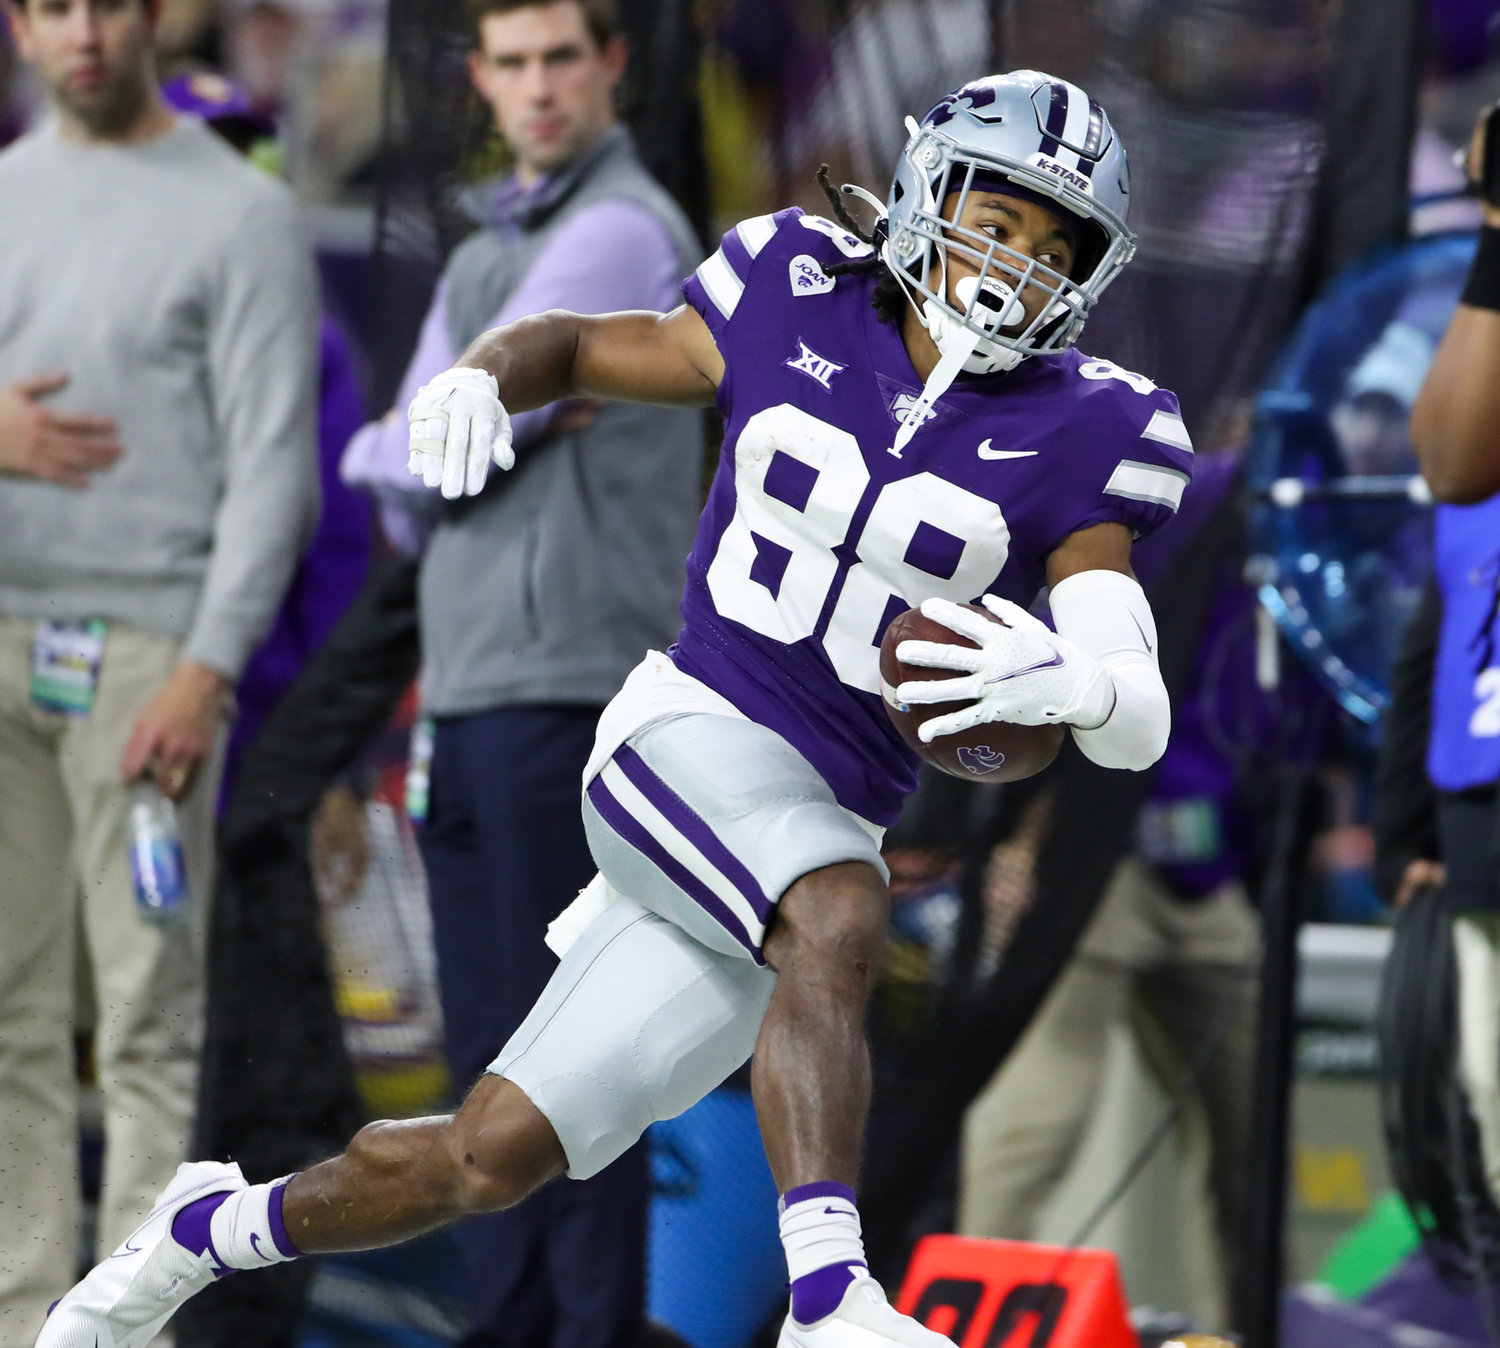 Kansas State Wildcats wide receiver Phillip Brooks (88) carries the ball on a 34-yard catch-and-run reception during the TaxAct Texas Bowl on Jan. 4, 2022 in Houston, Texas.